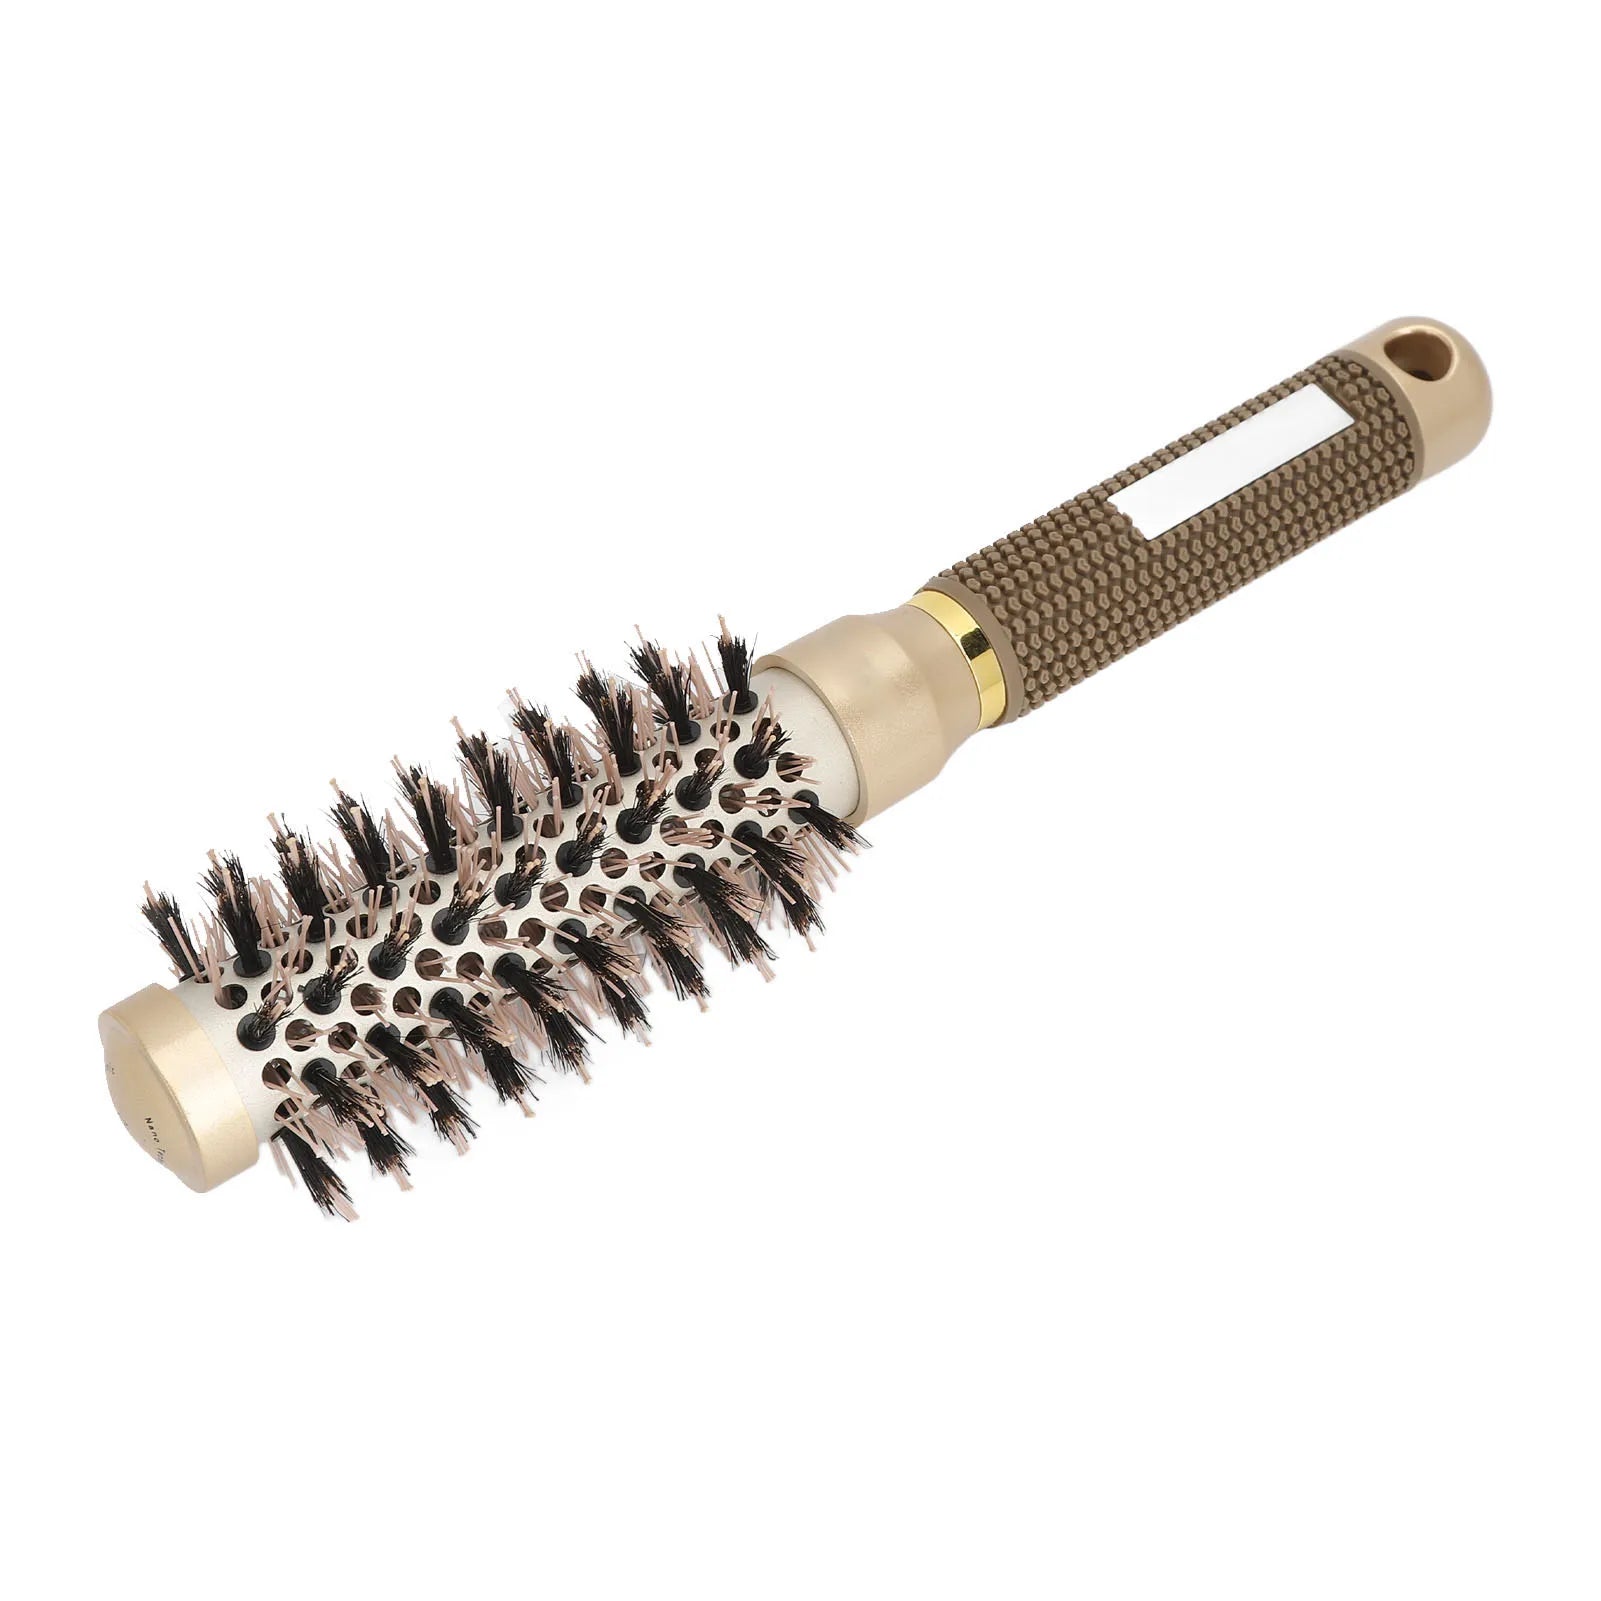 Blow Drying Round Brush Round Brush for Blow Drying Fast Dry Precise Styling Prevent Static Ionic Round Barrel Brush 1inch LUXLIFE BRANDS